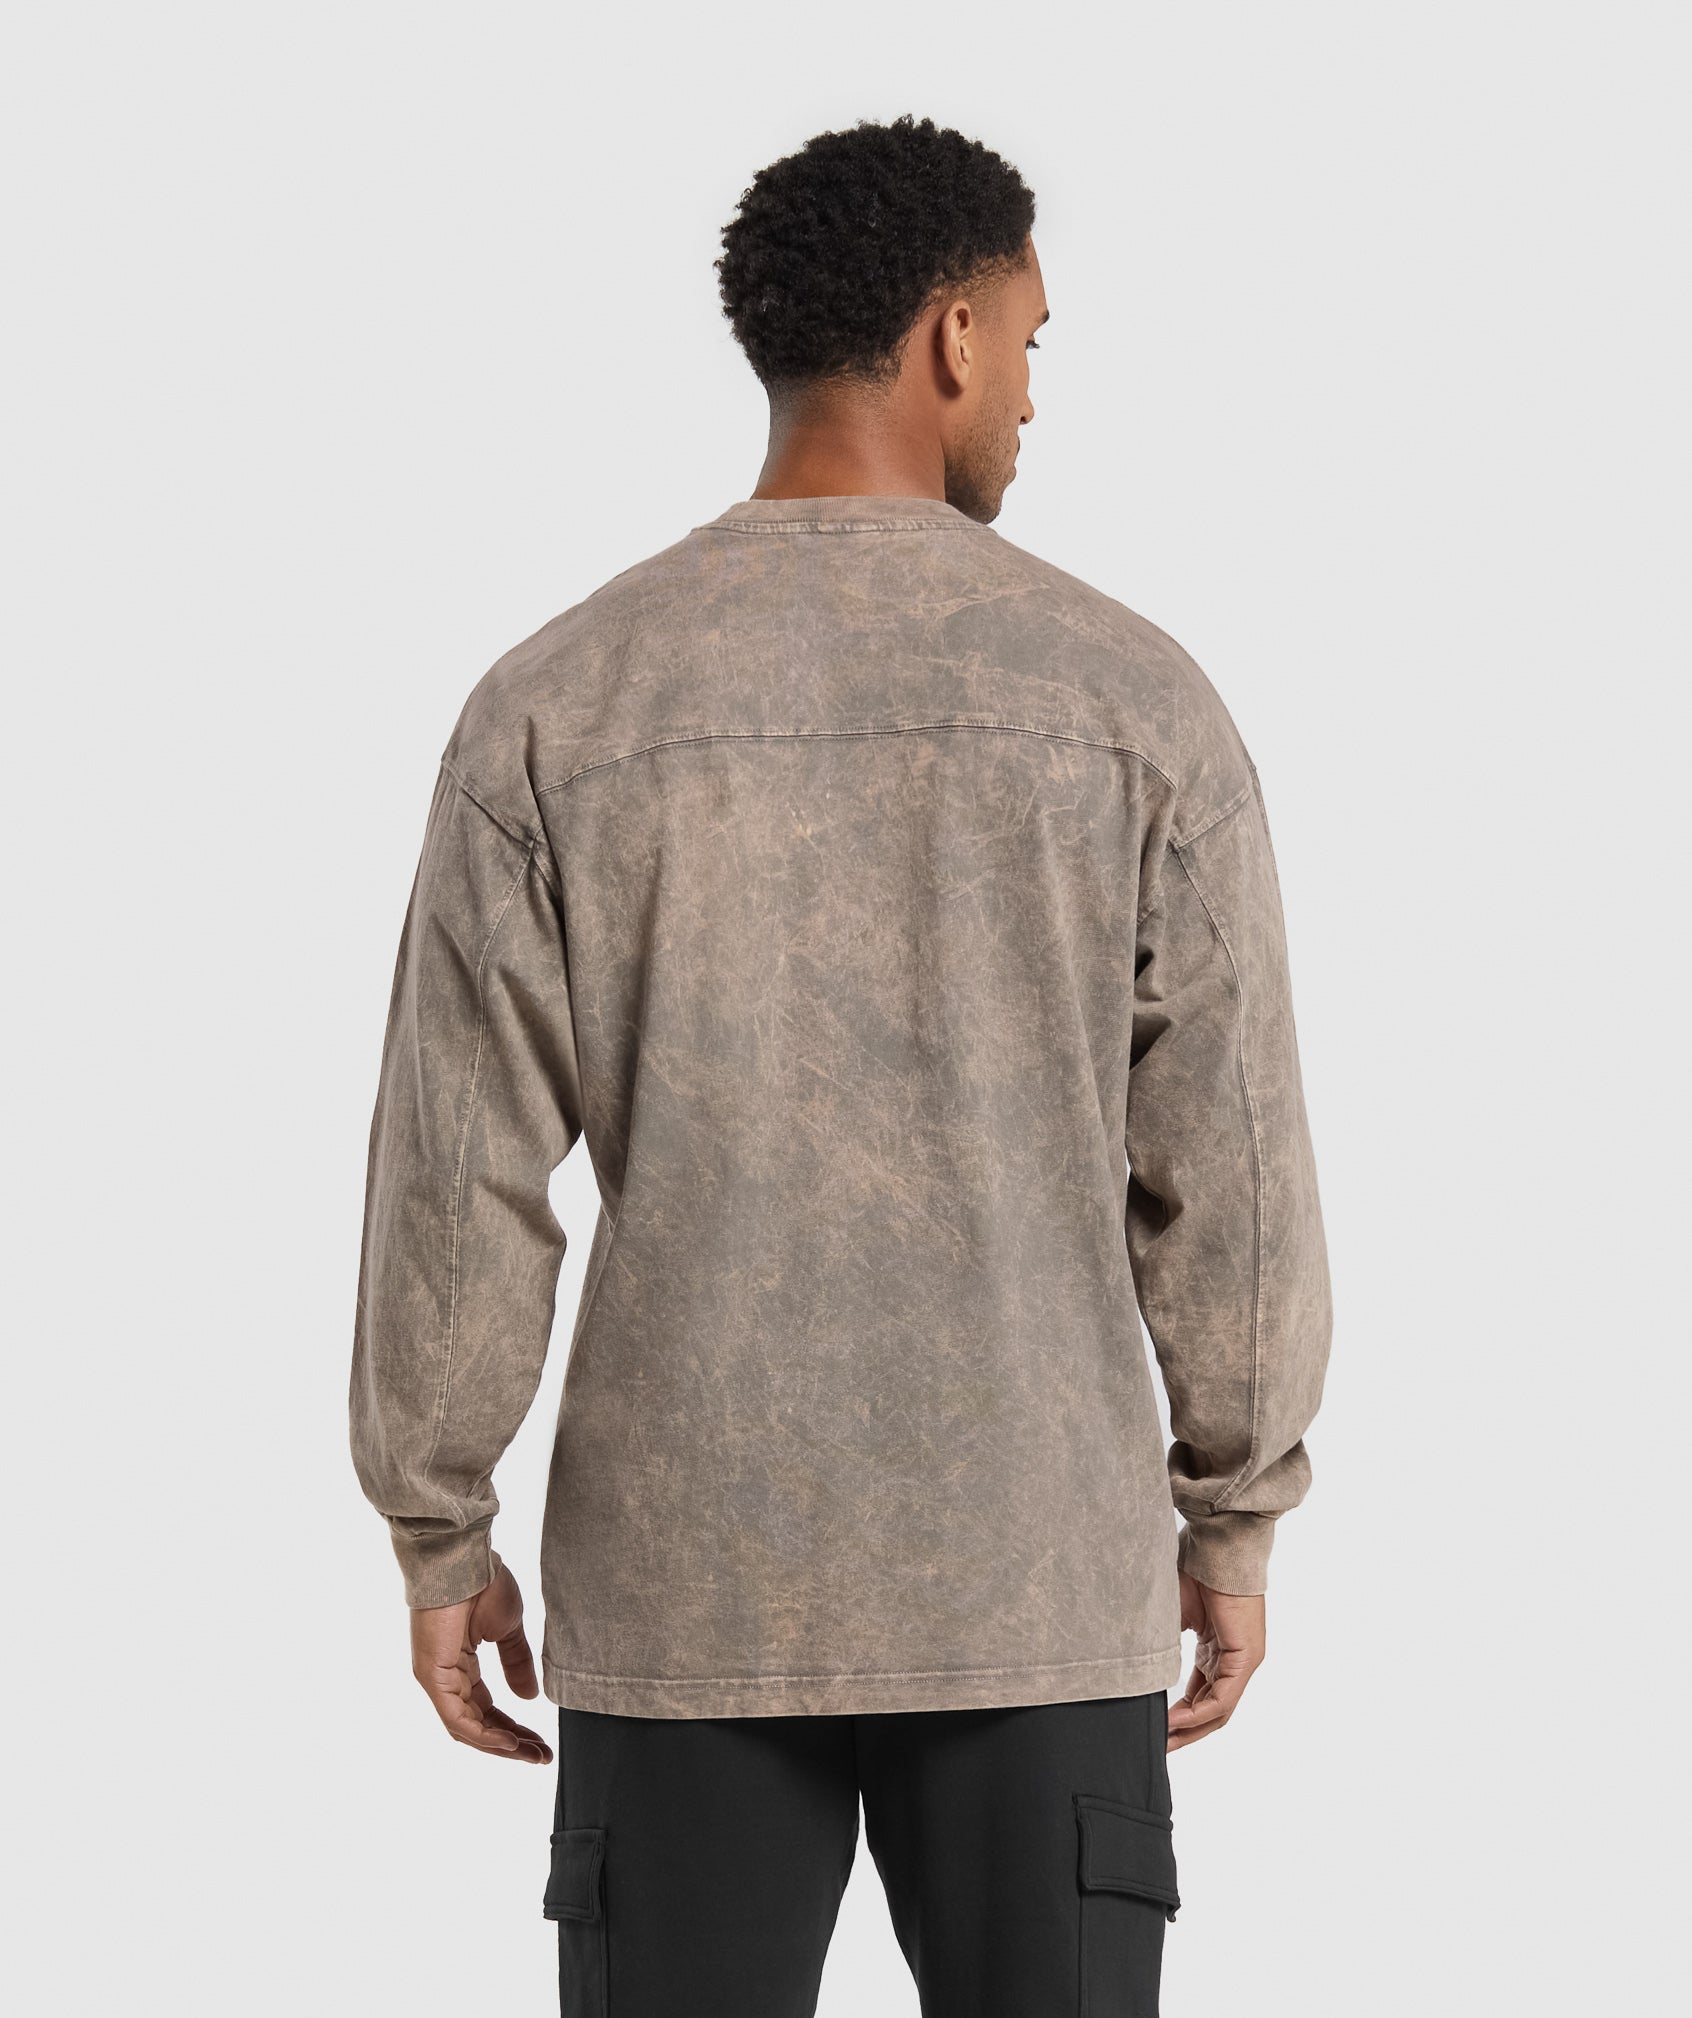 Rest Day Washed Long Sleeve T-Shirt in Linen Brown - view 2